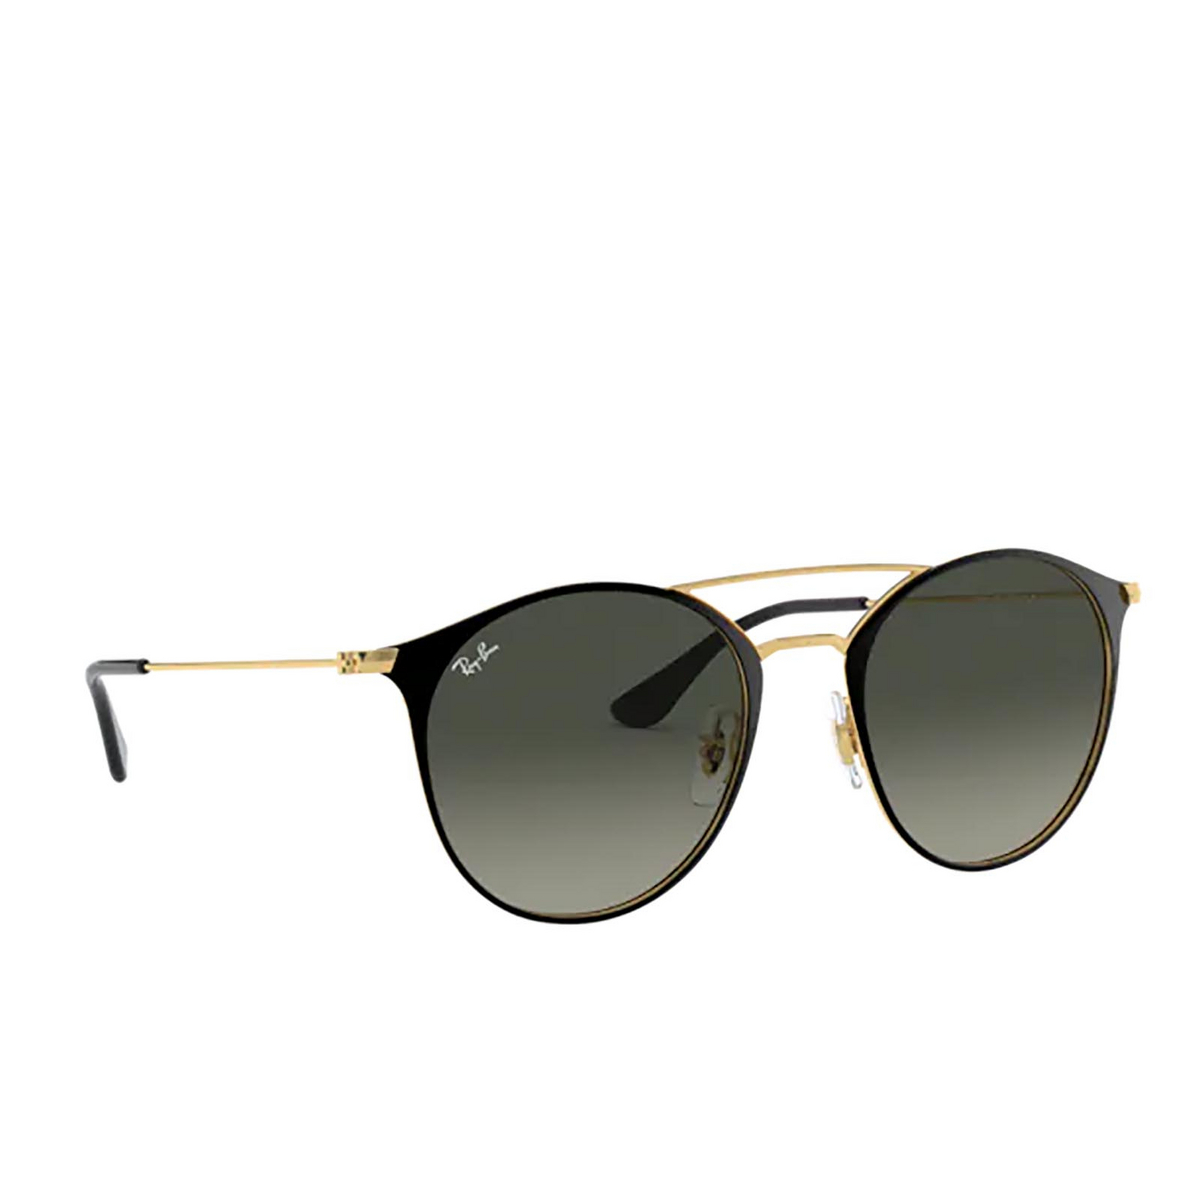 Ray-Ban® Round Sunglasses: RB3546 color 187/71 Black On Arista - three-quarters view